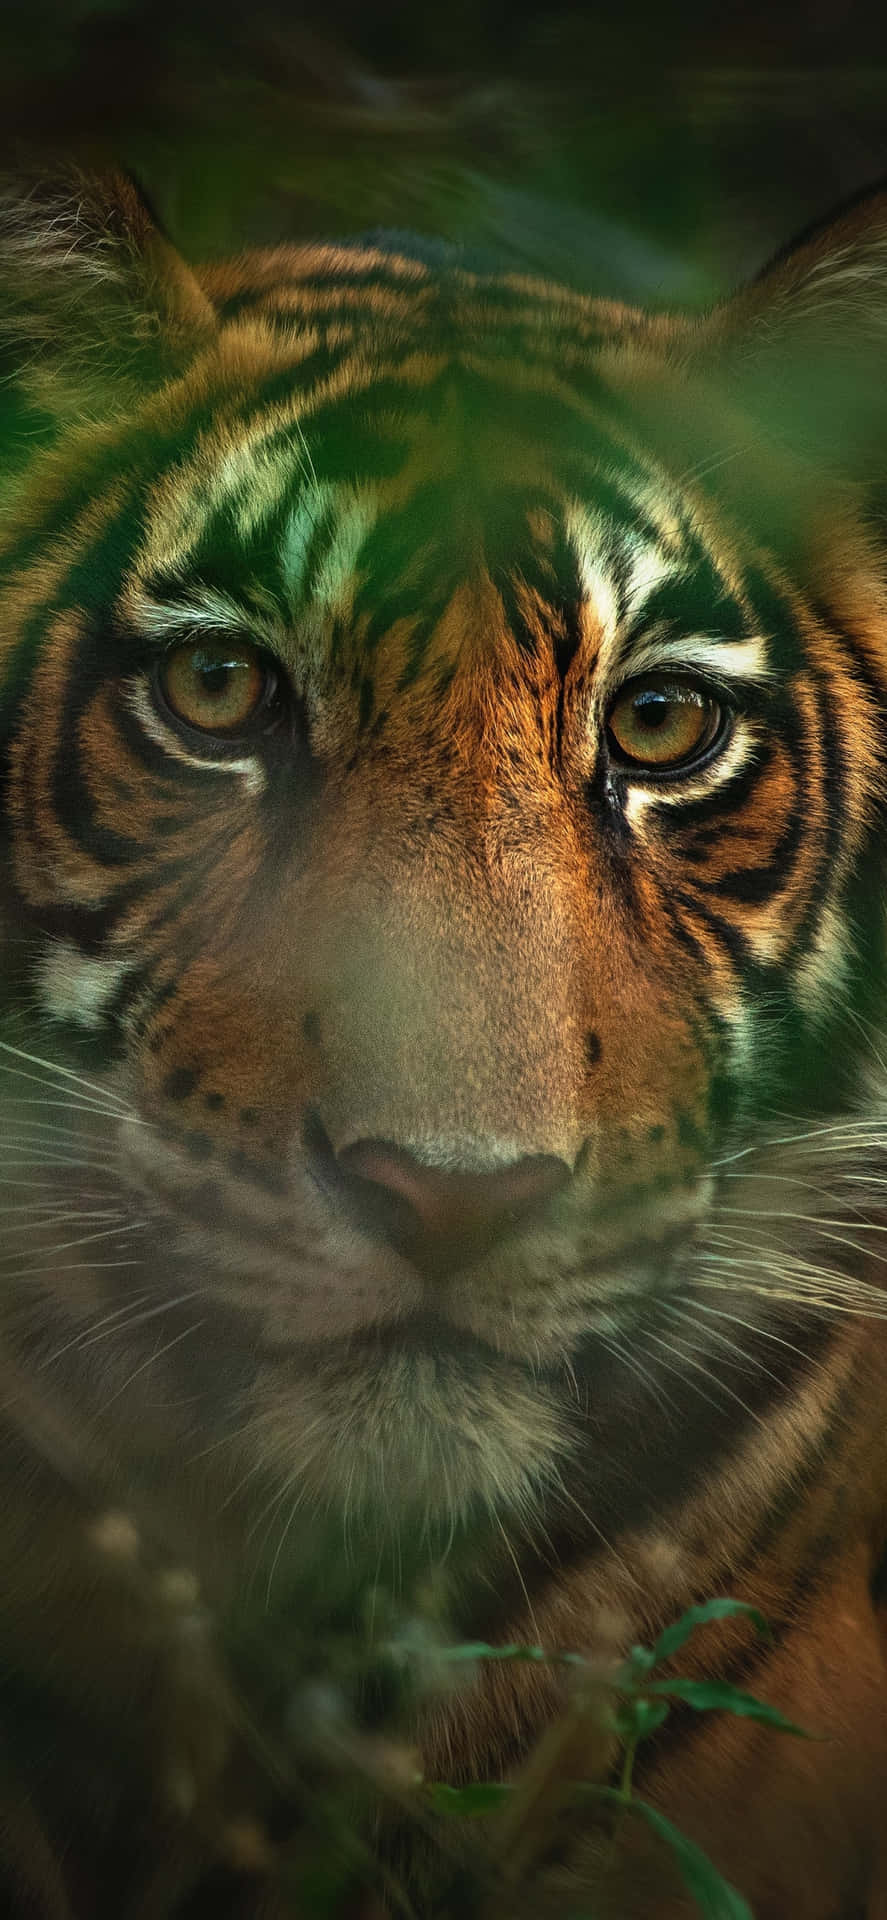 Let Your Tiger Roar with Tiger Phone Wallpaper